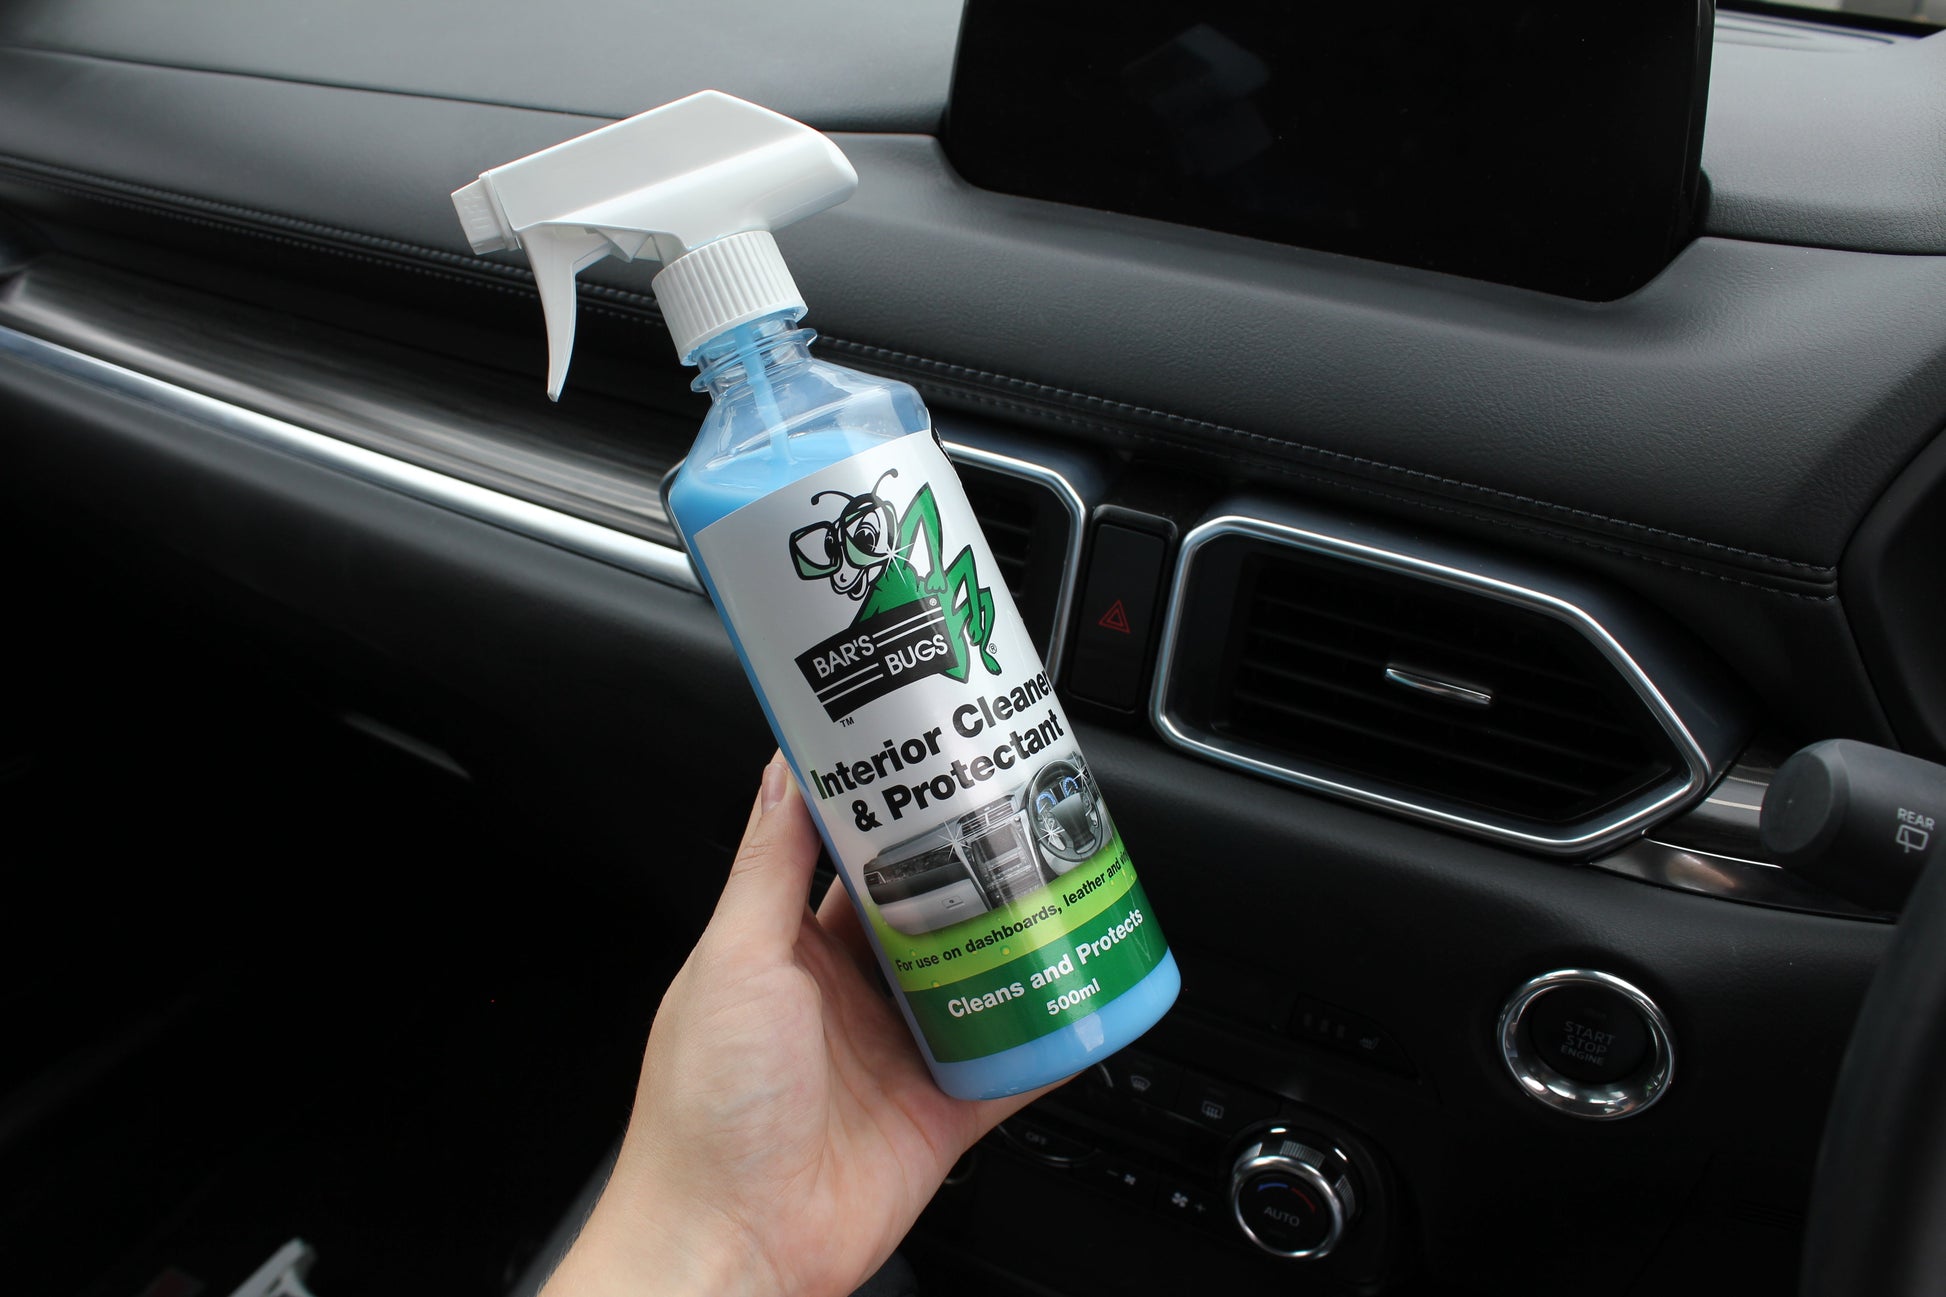 Interior Cleaner & Protectant Car Cleaning